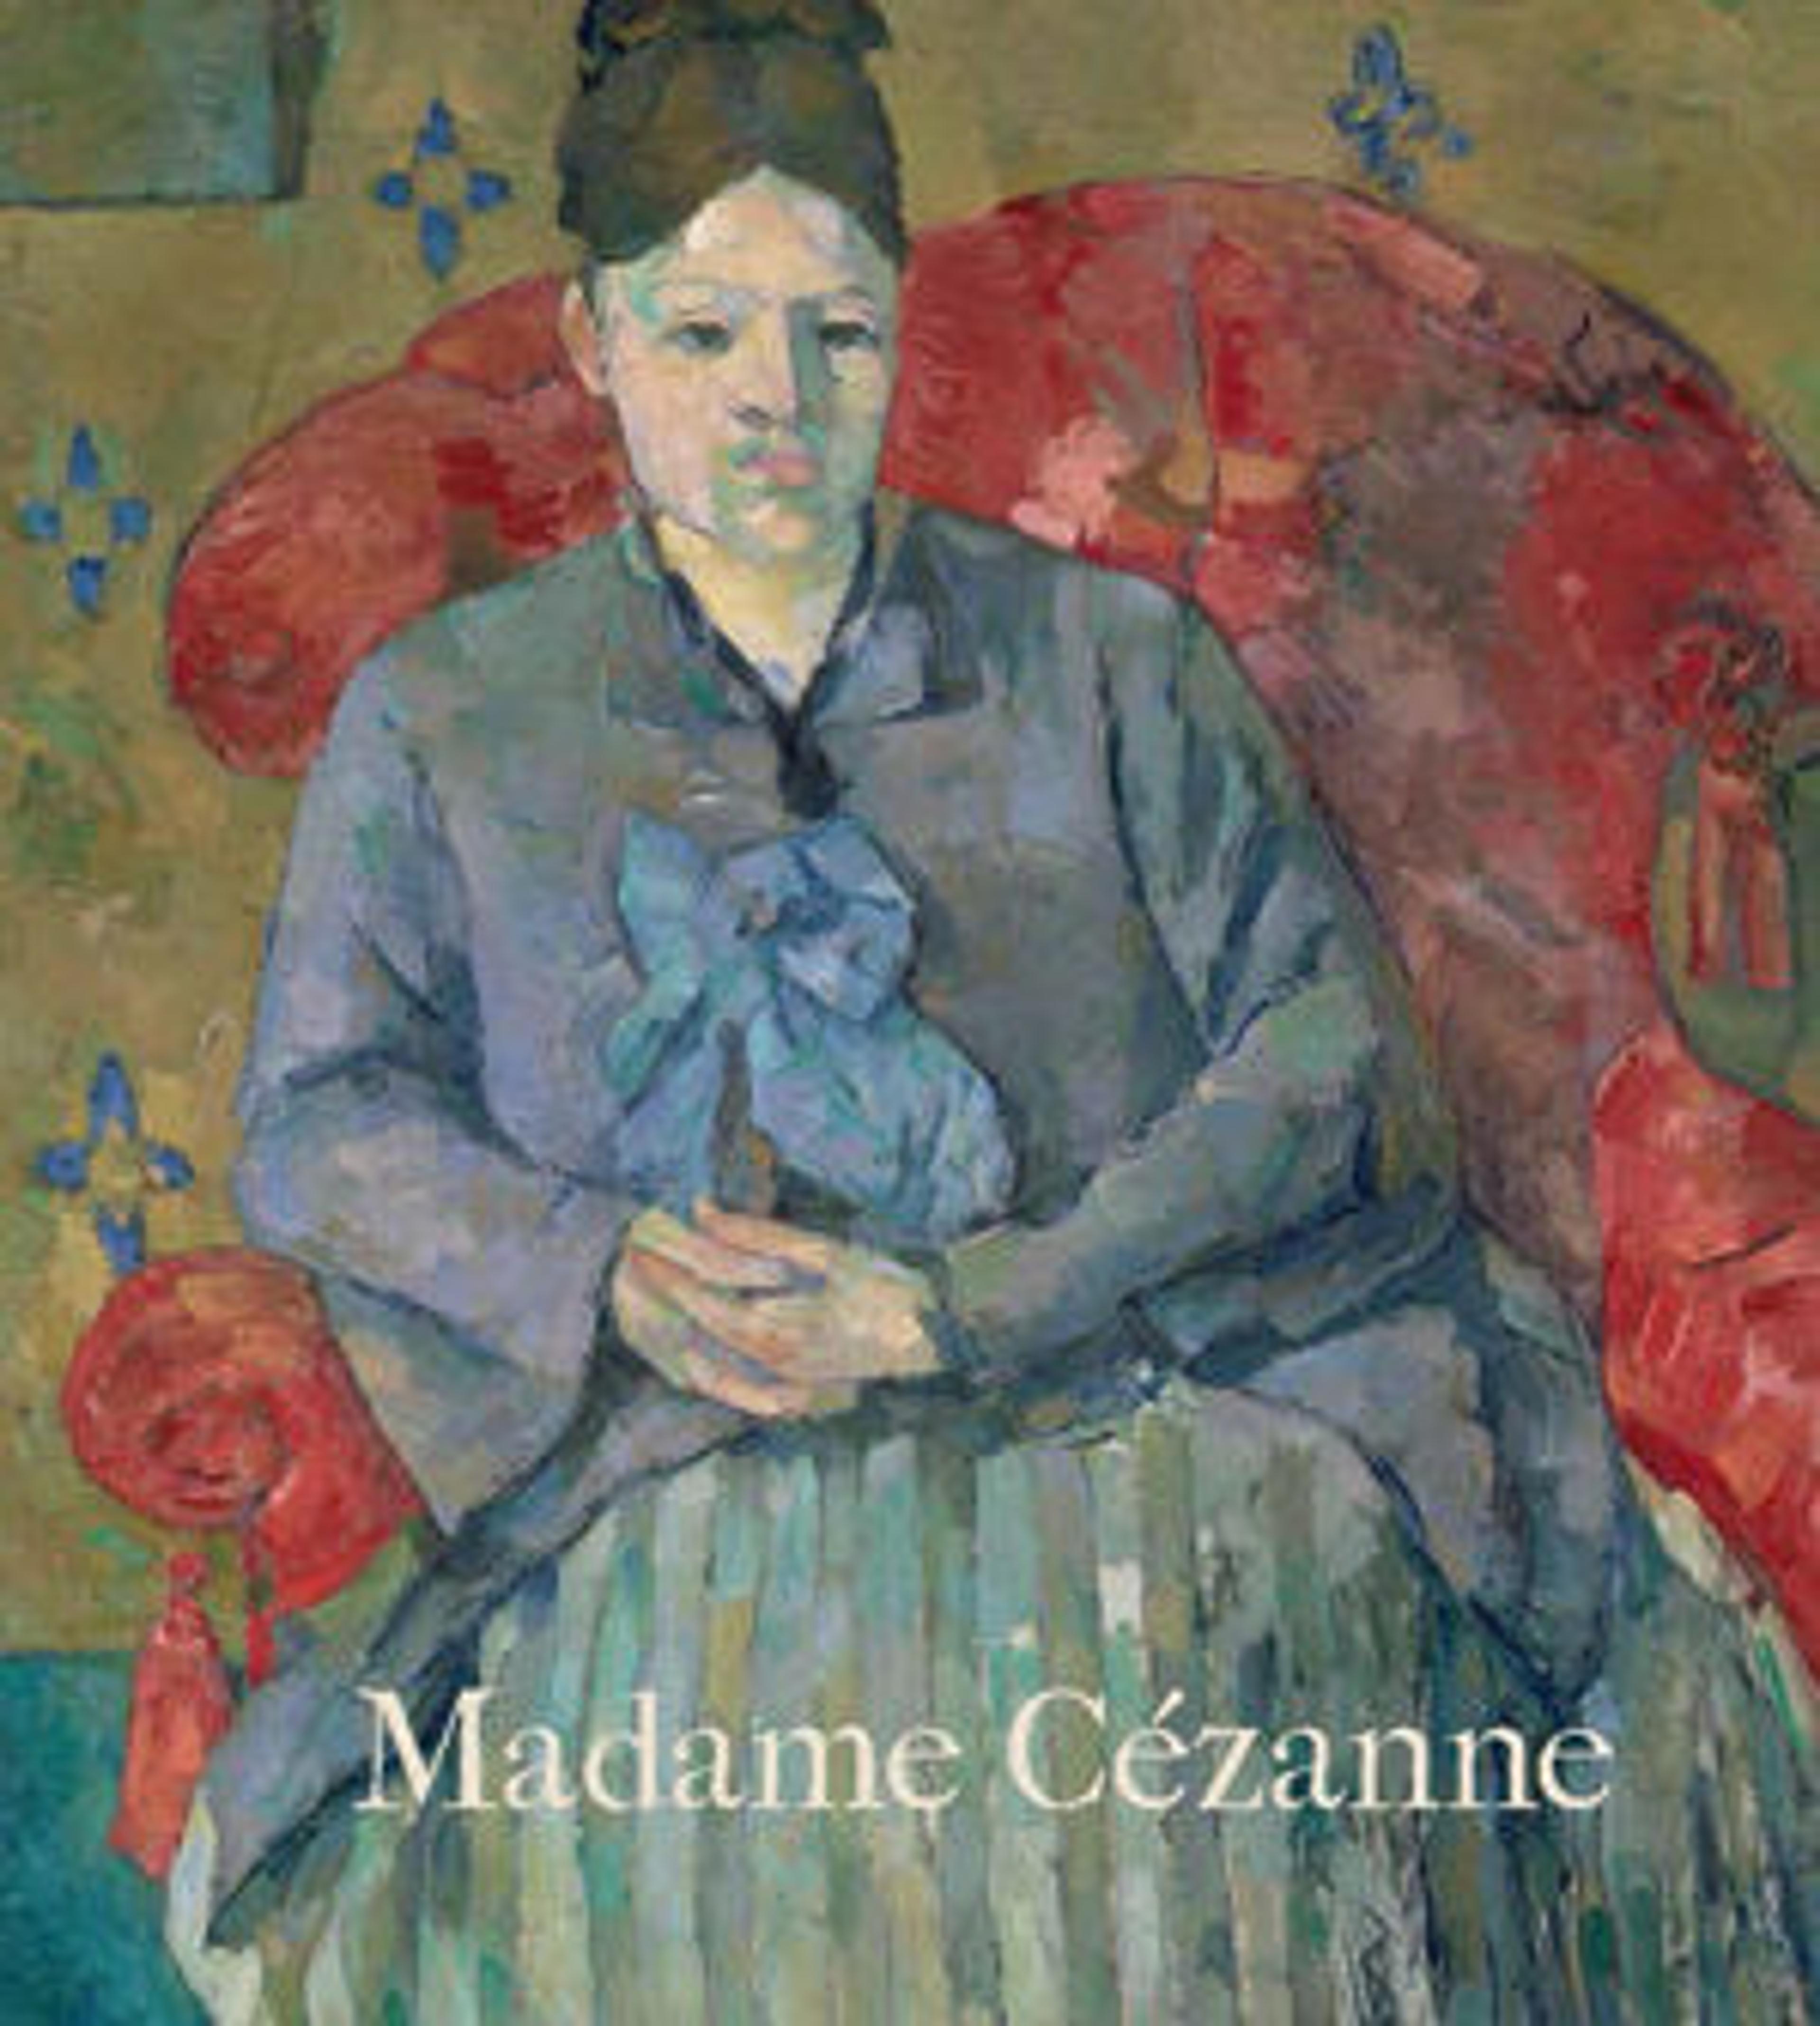 Madame Cézanne, by Dita Amory with contributions by Philippe Cézanne, Ann Dumas, Charlotte Hale, Kathryn Kremnitzer, Marjorie Shelley, and Hilary Spurling